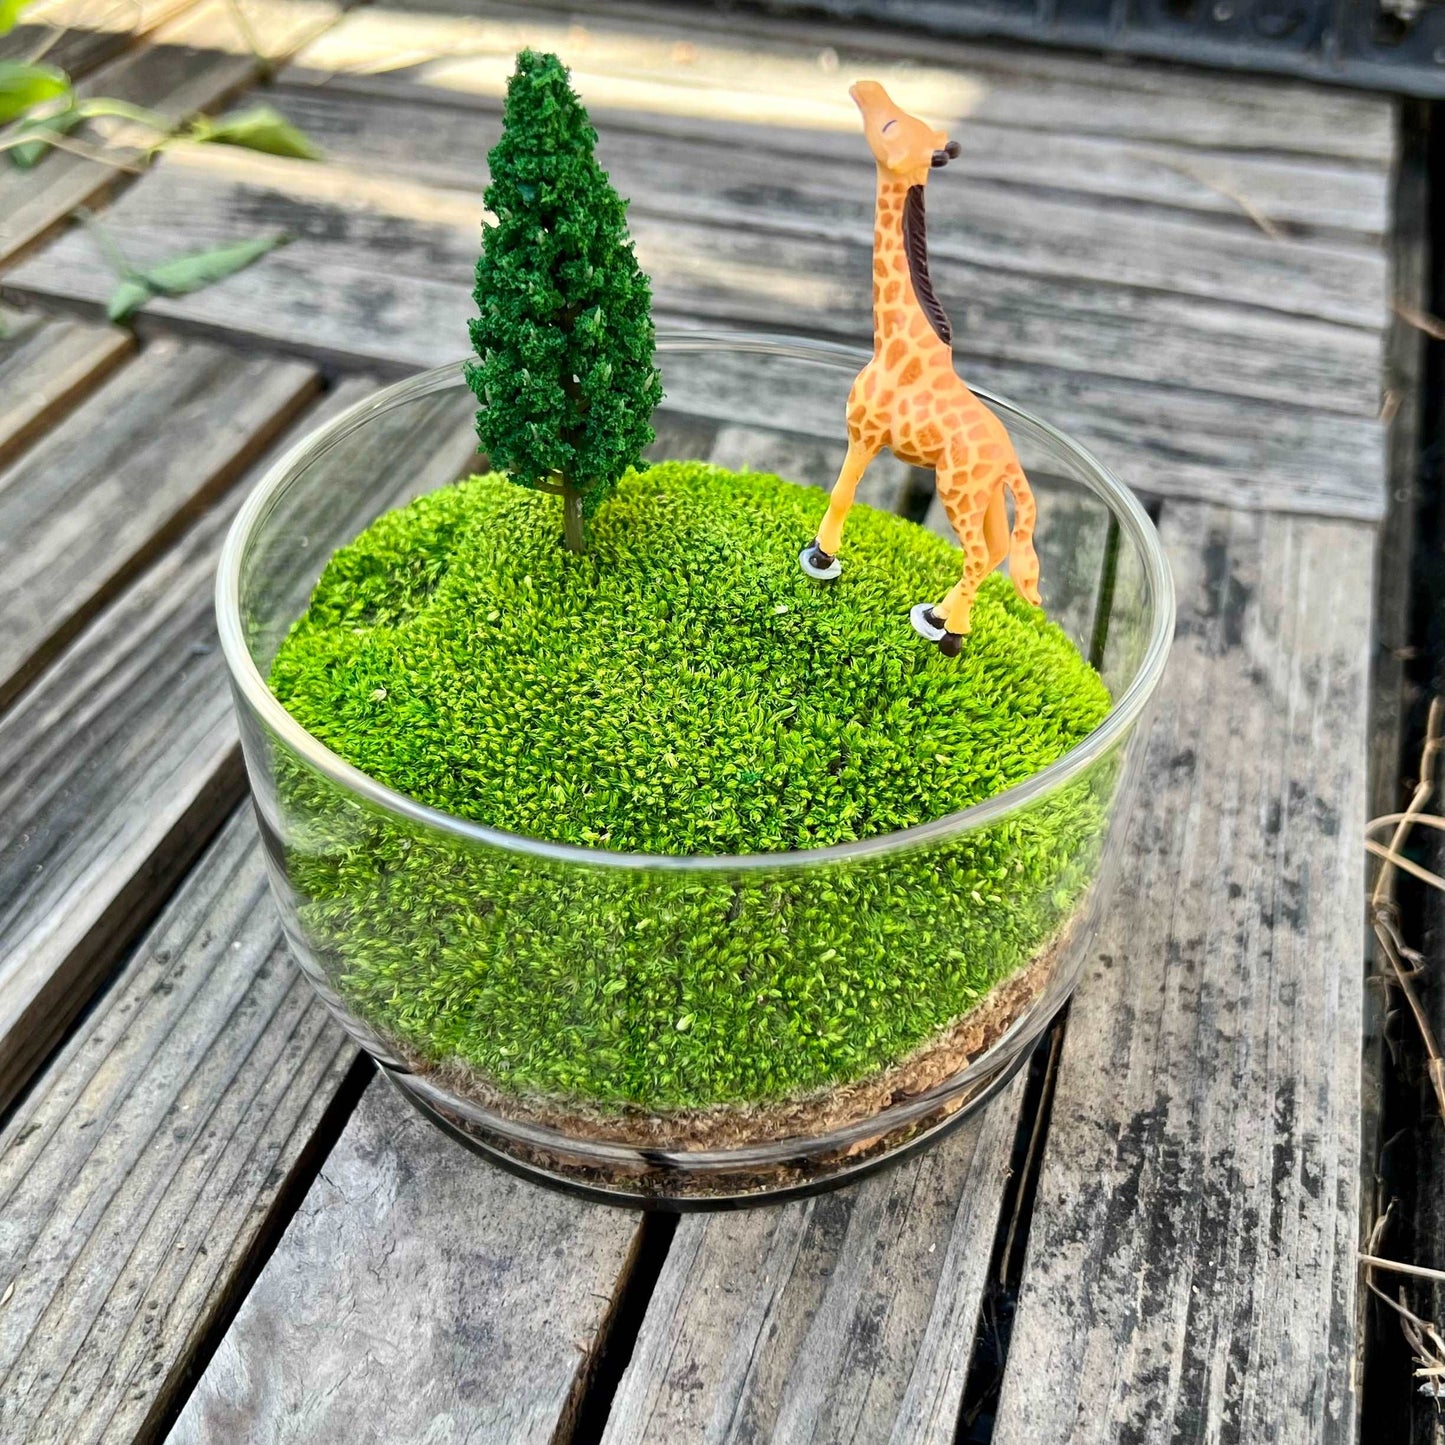 Handmade Terrarium Mini Giraffe Desktop Decoration Micro Landscape LawAre you tired of the monotony of your computer desktop? Say goodbye to boredom with our meticulously designed and handmade desktop decorations. Each product is craft